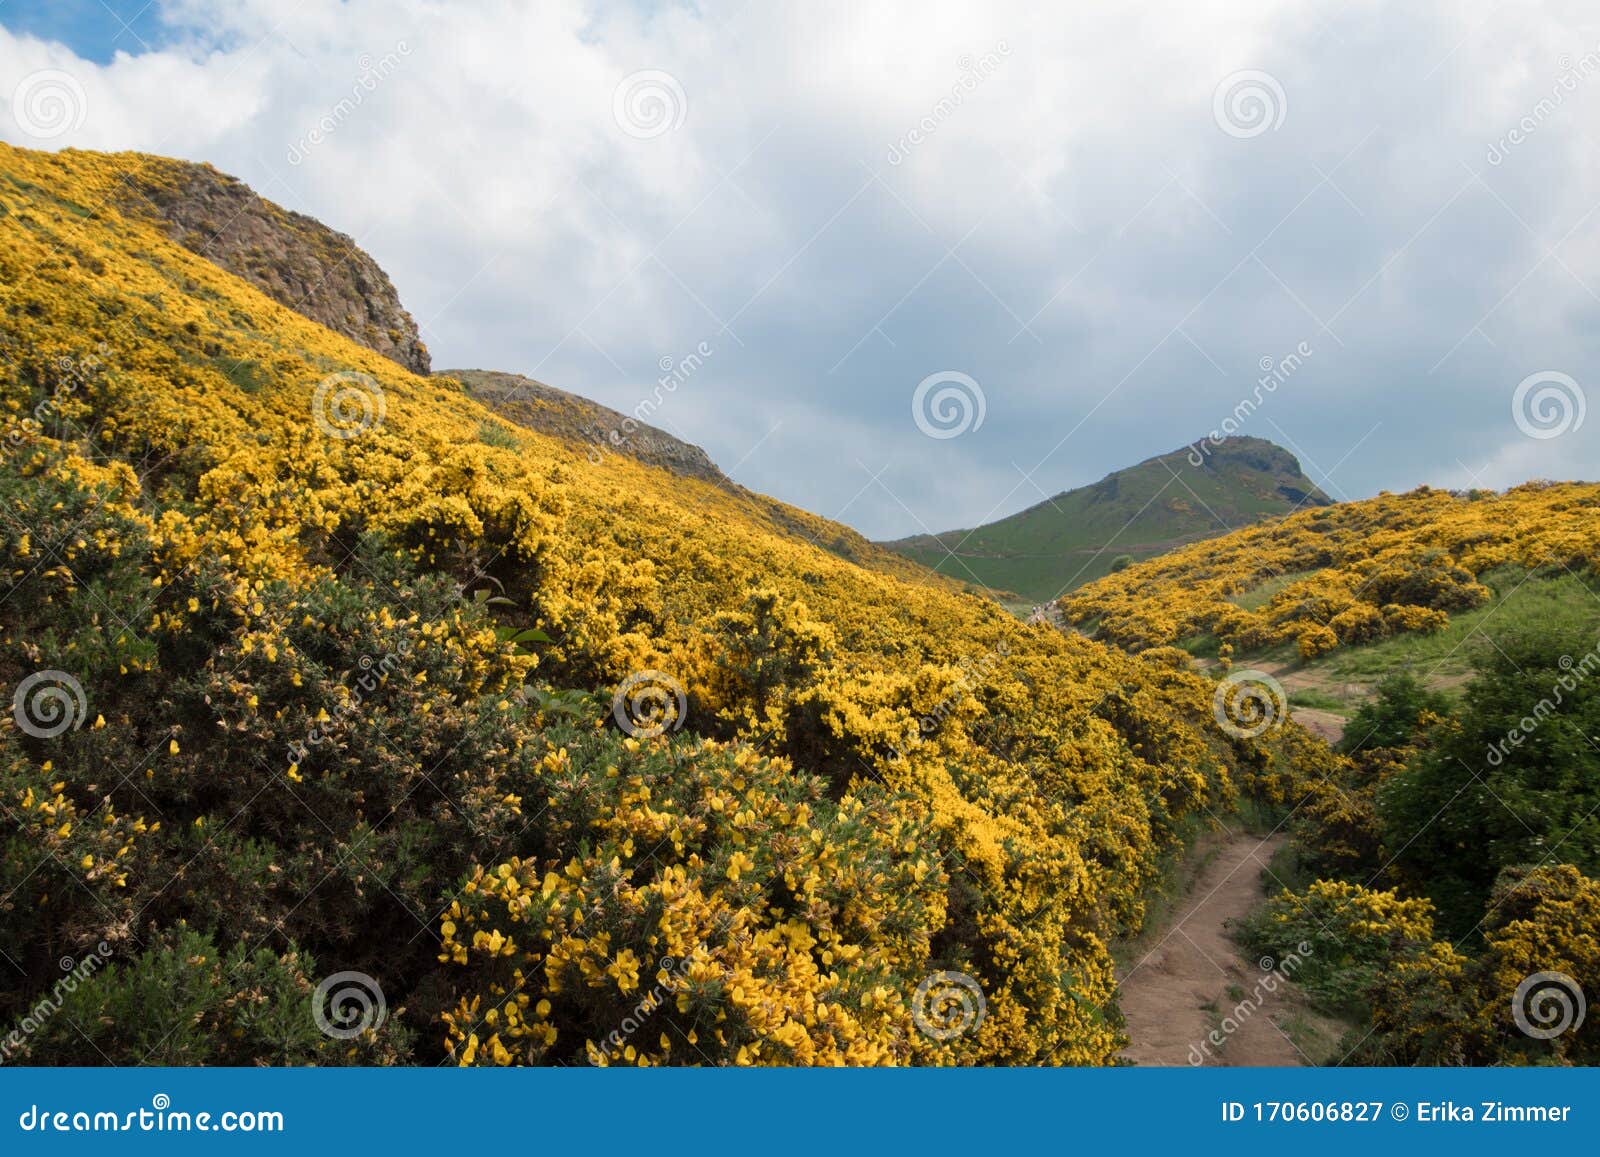 view of scottish mountains with yellow flowers